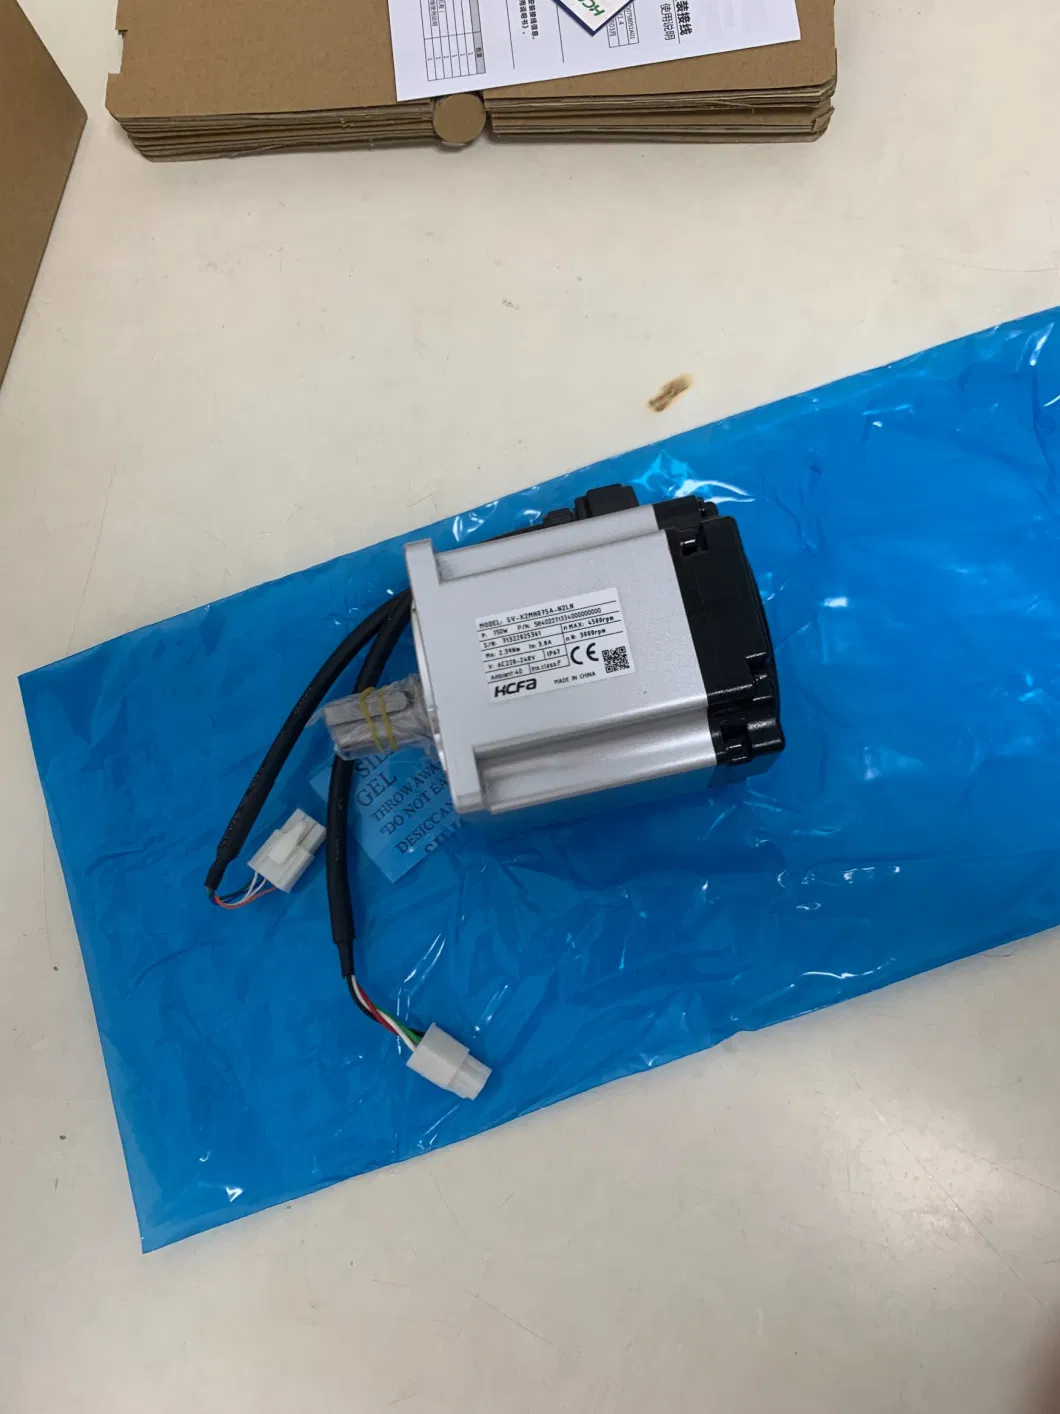 Motion Control Sv-X2 Servo Motor and Drive for Robot